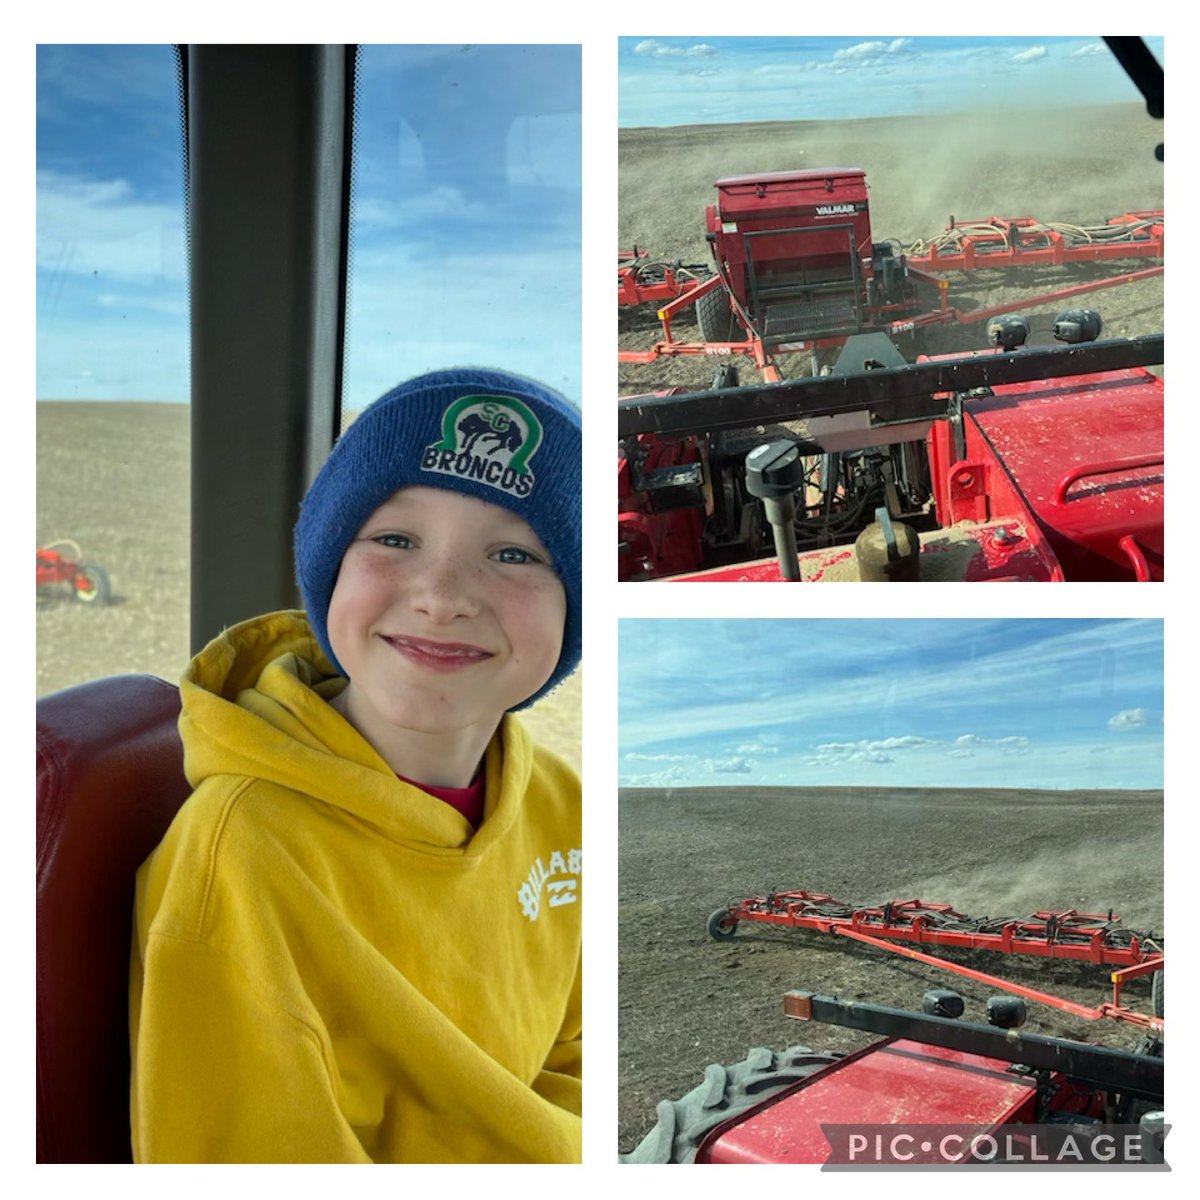 Must be spring in Southwest Saskatchewan - #Edge going down today - complete with a @swiftcurrentbro fan - excited for the next round of the playoffs! Photo credit: @ruestleyen @gowancanada @SalfordGroup #getyourEDGEon